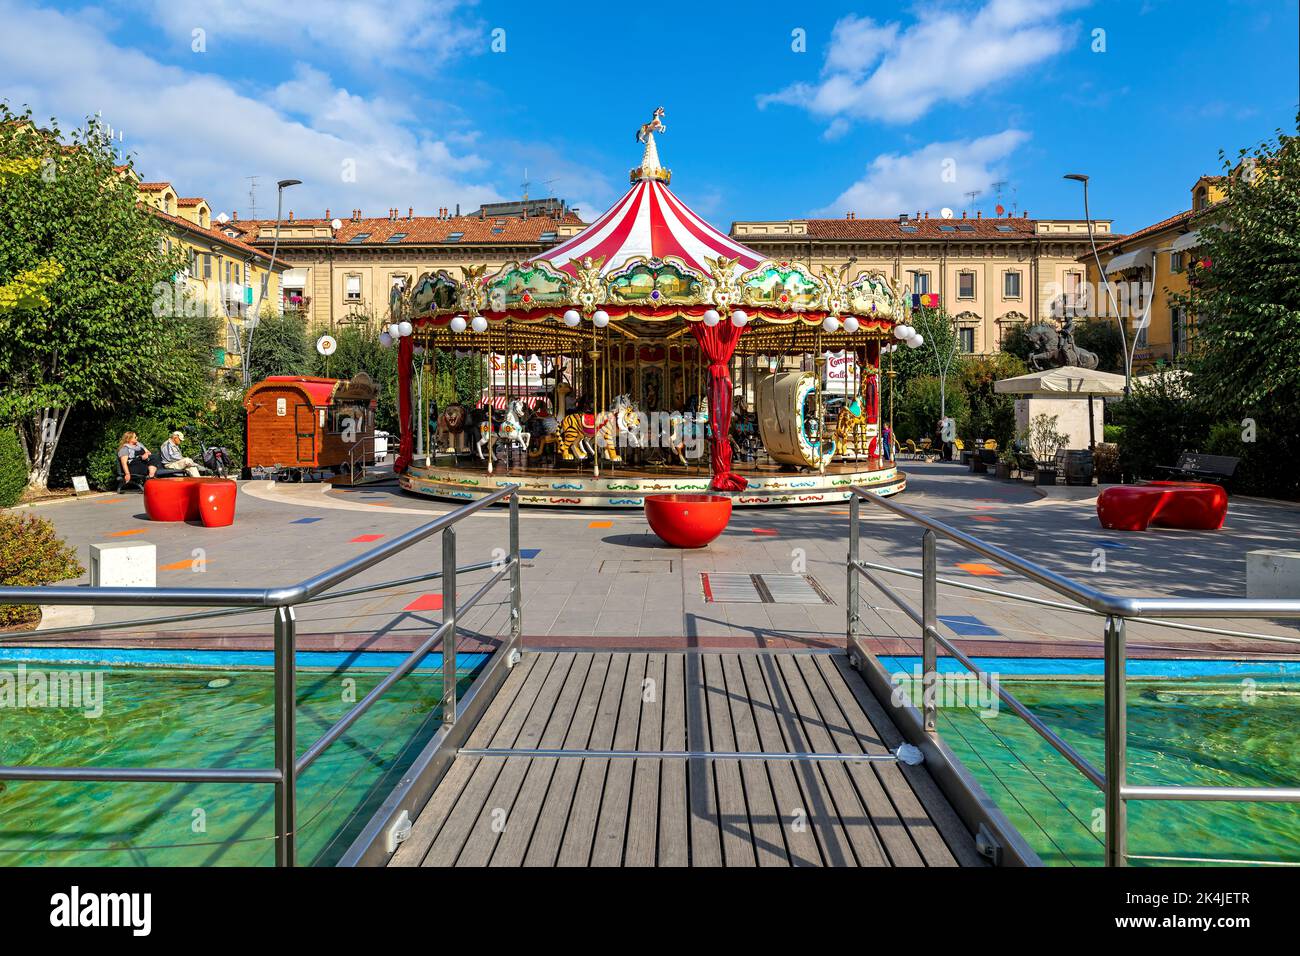 Colorful carousel on small piazza with modern fountain in Alba - town in Piedmont, Northern Italy. Stock Photo